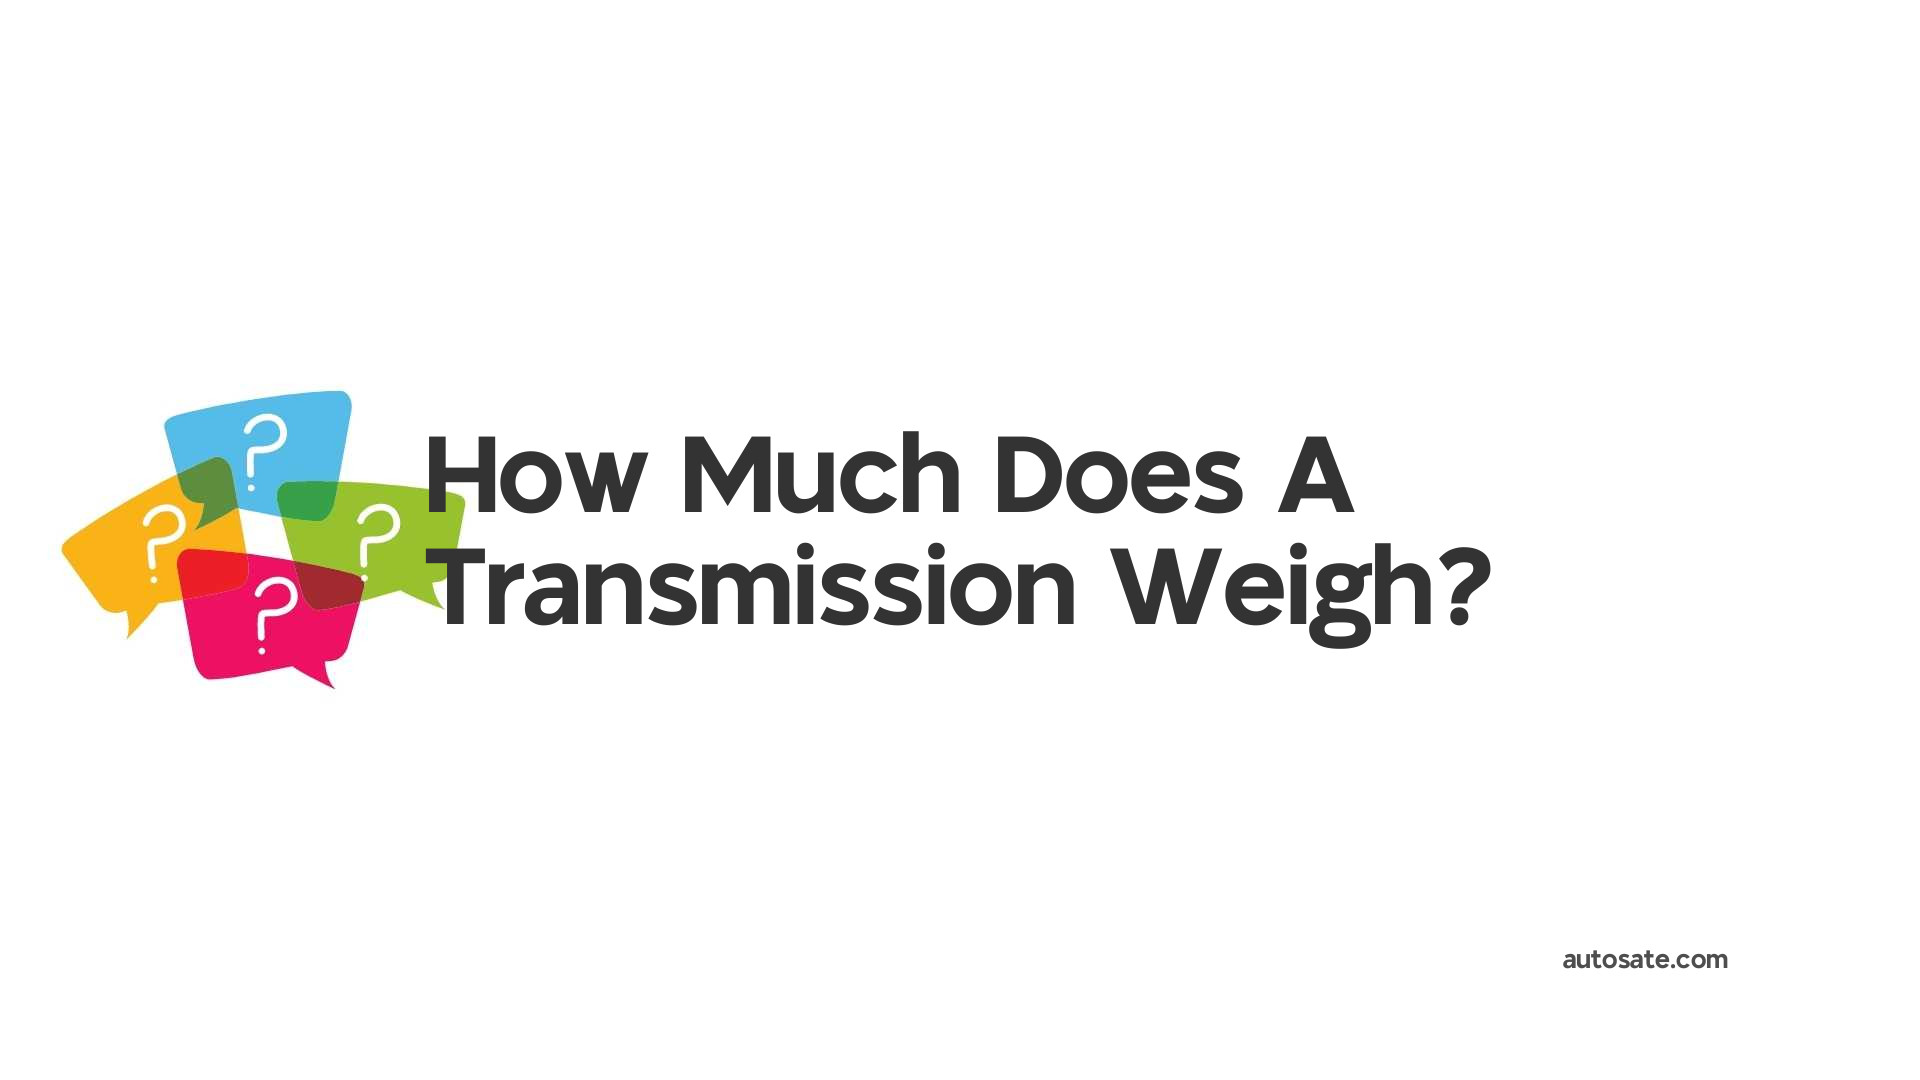 How Much Does A Transmission Weigh?